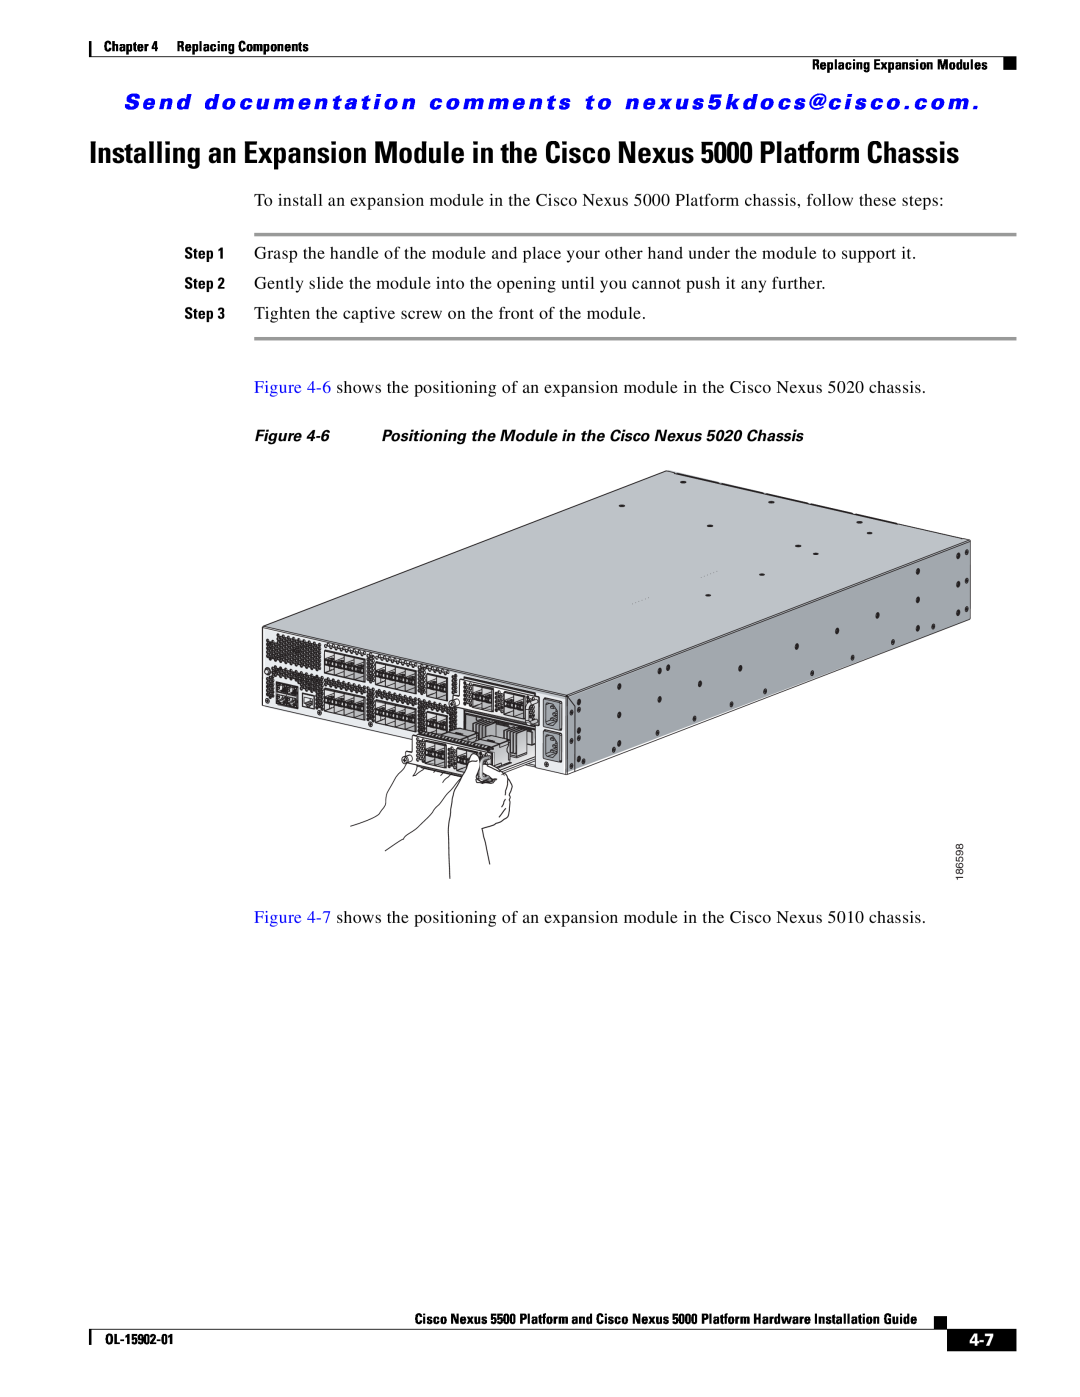 Cisco Systems 5000 manual Tighten the captive screw on the front of the module 